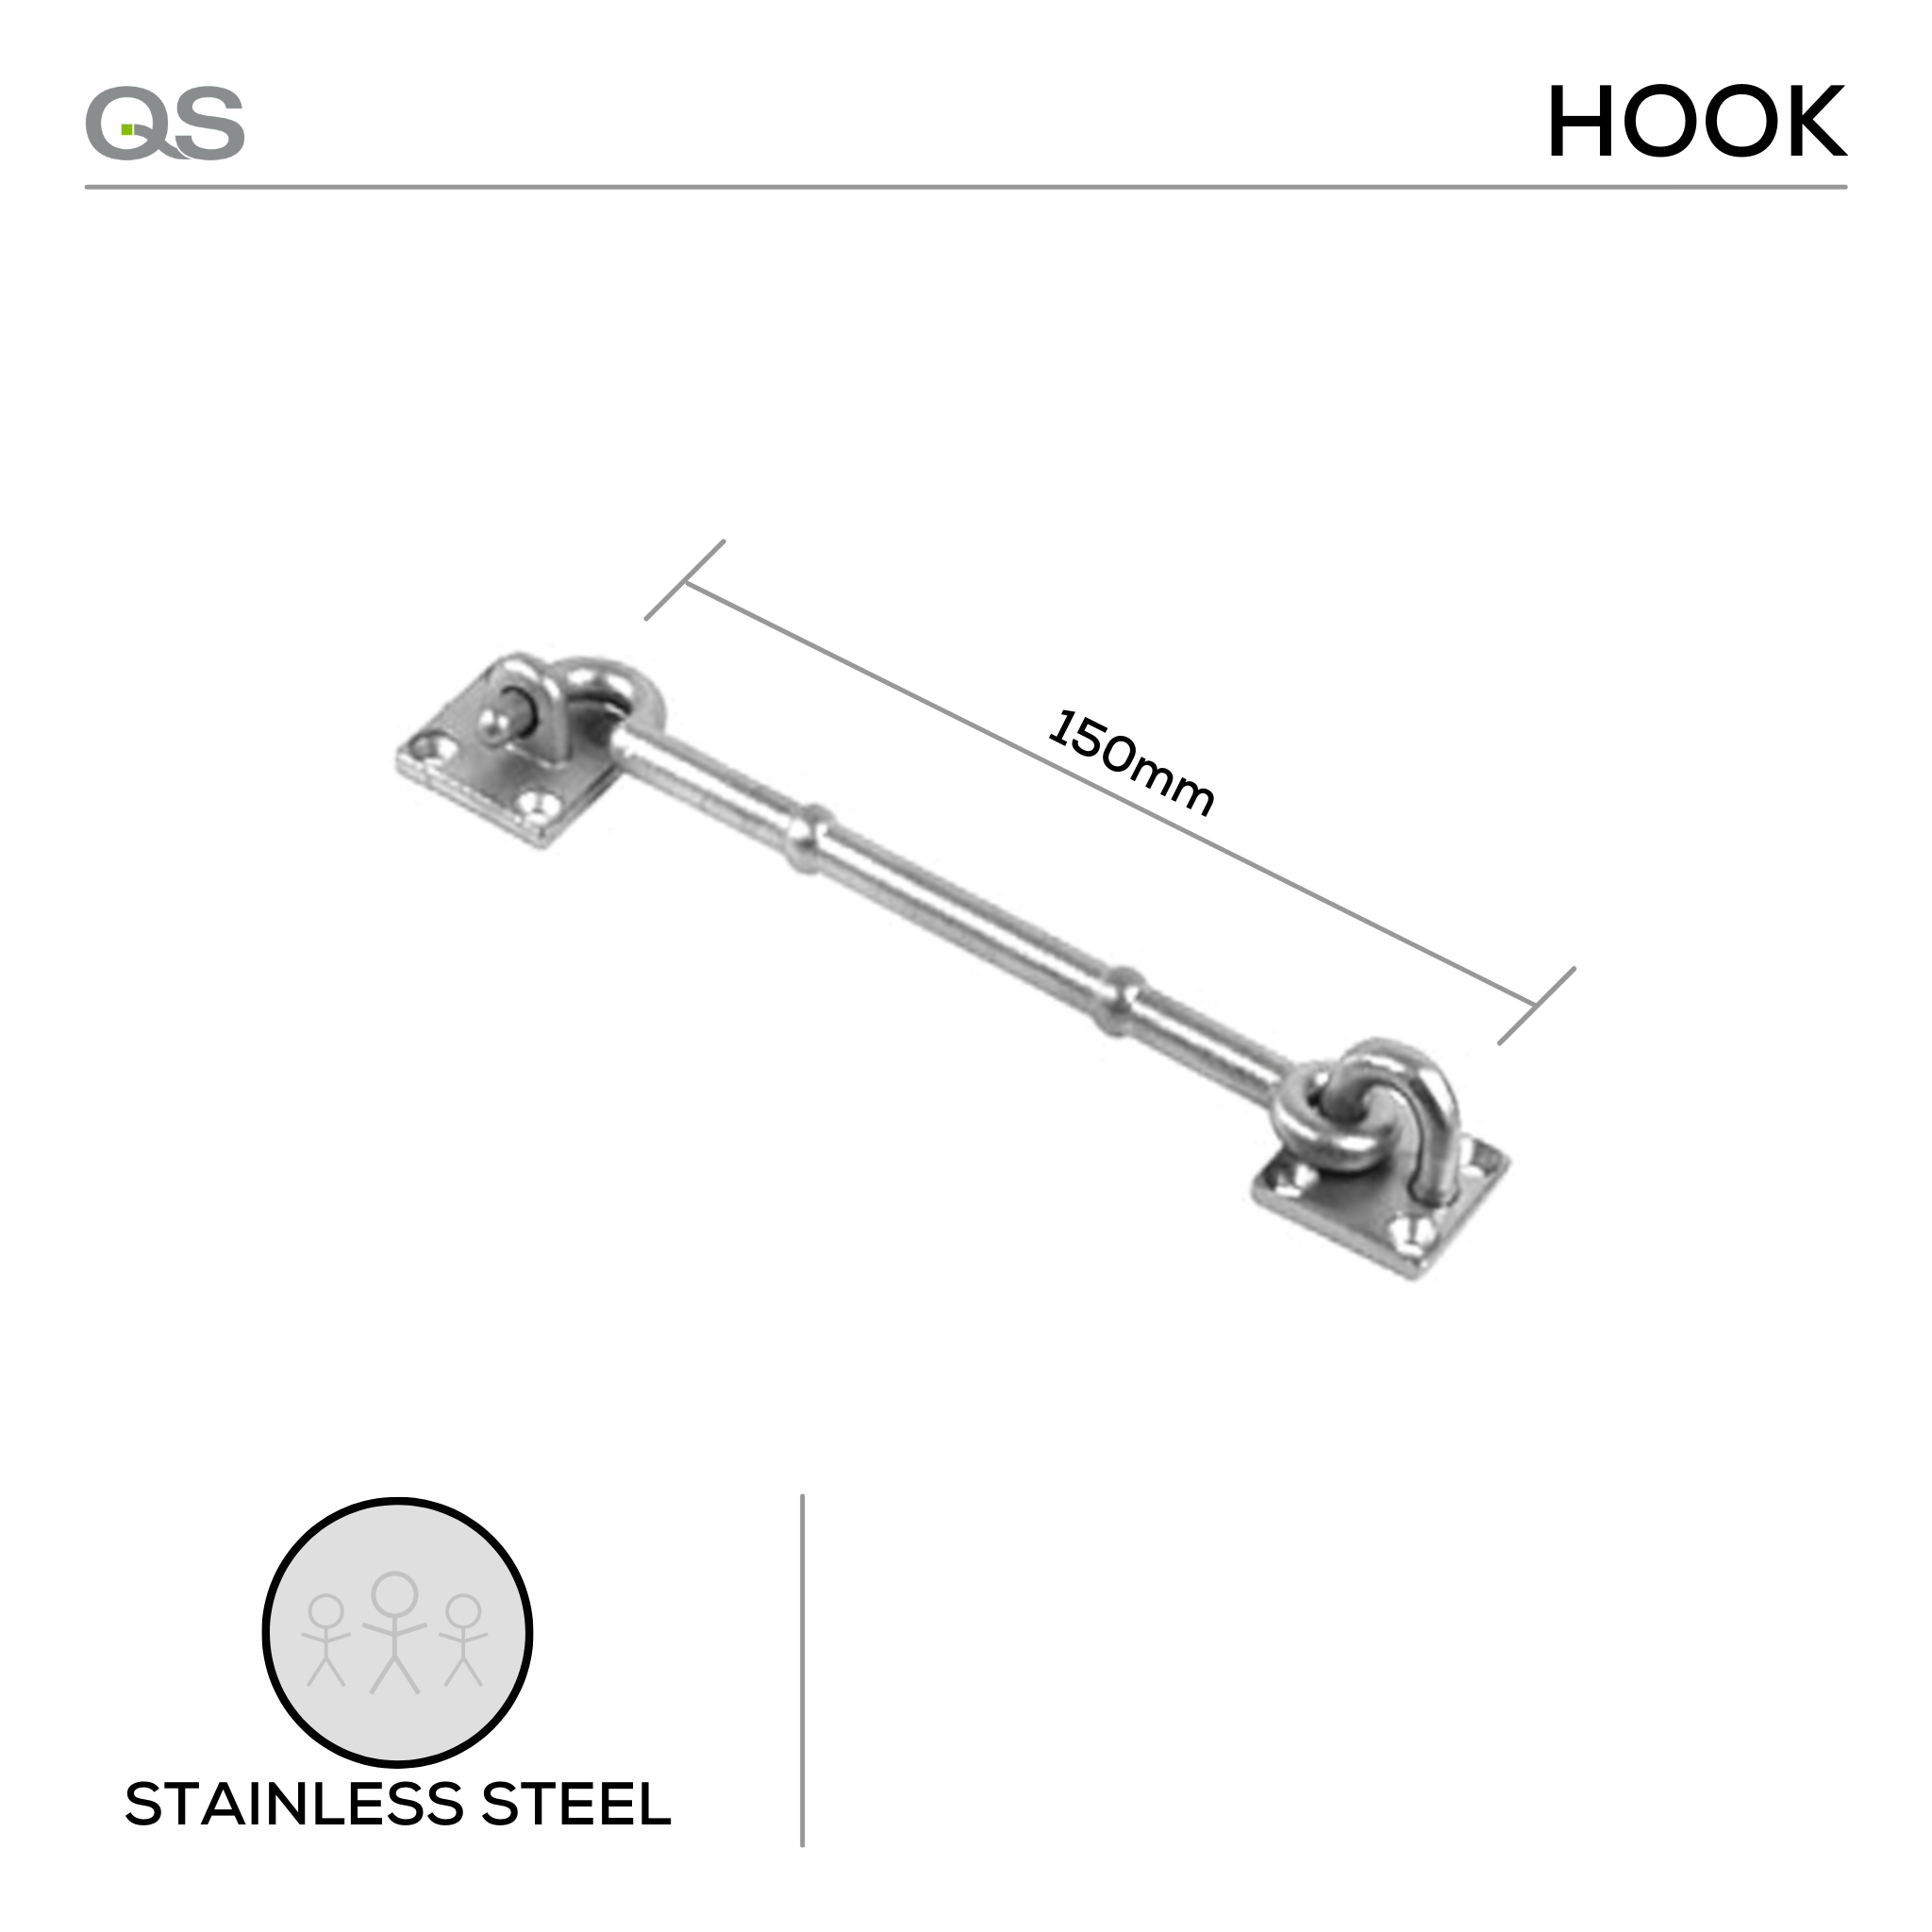 QS4449/2 150, Cabin Hook, 150mm (l), Stainless Steel, QS